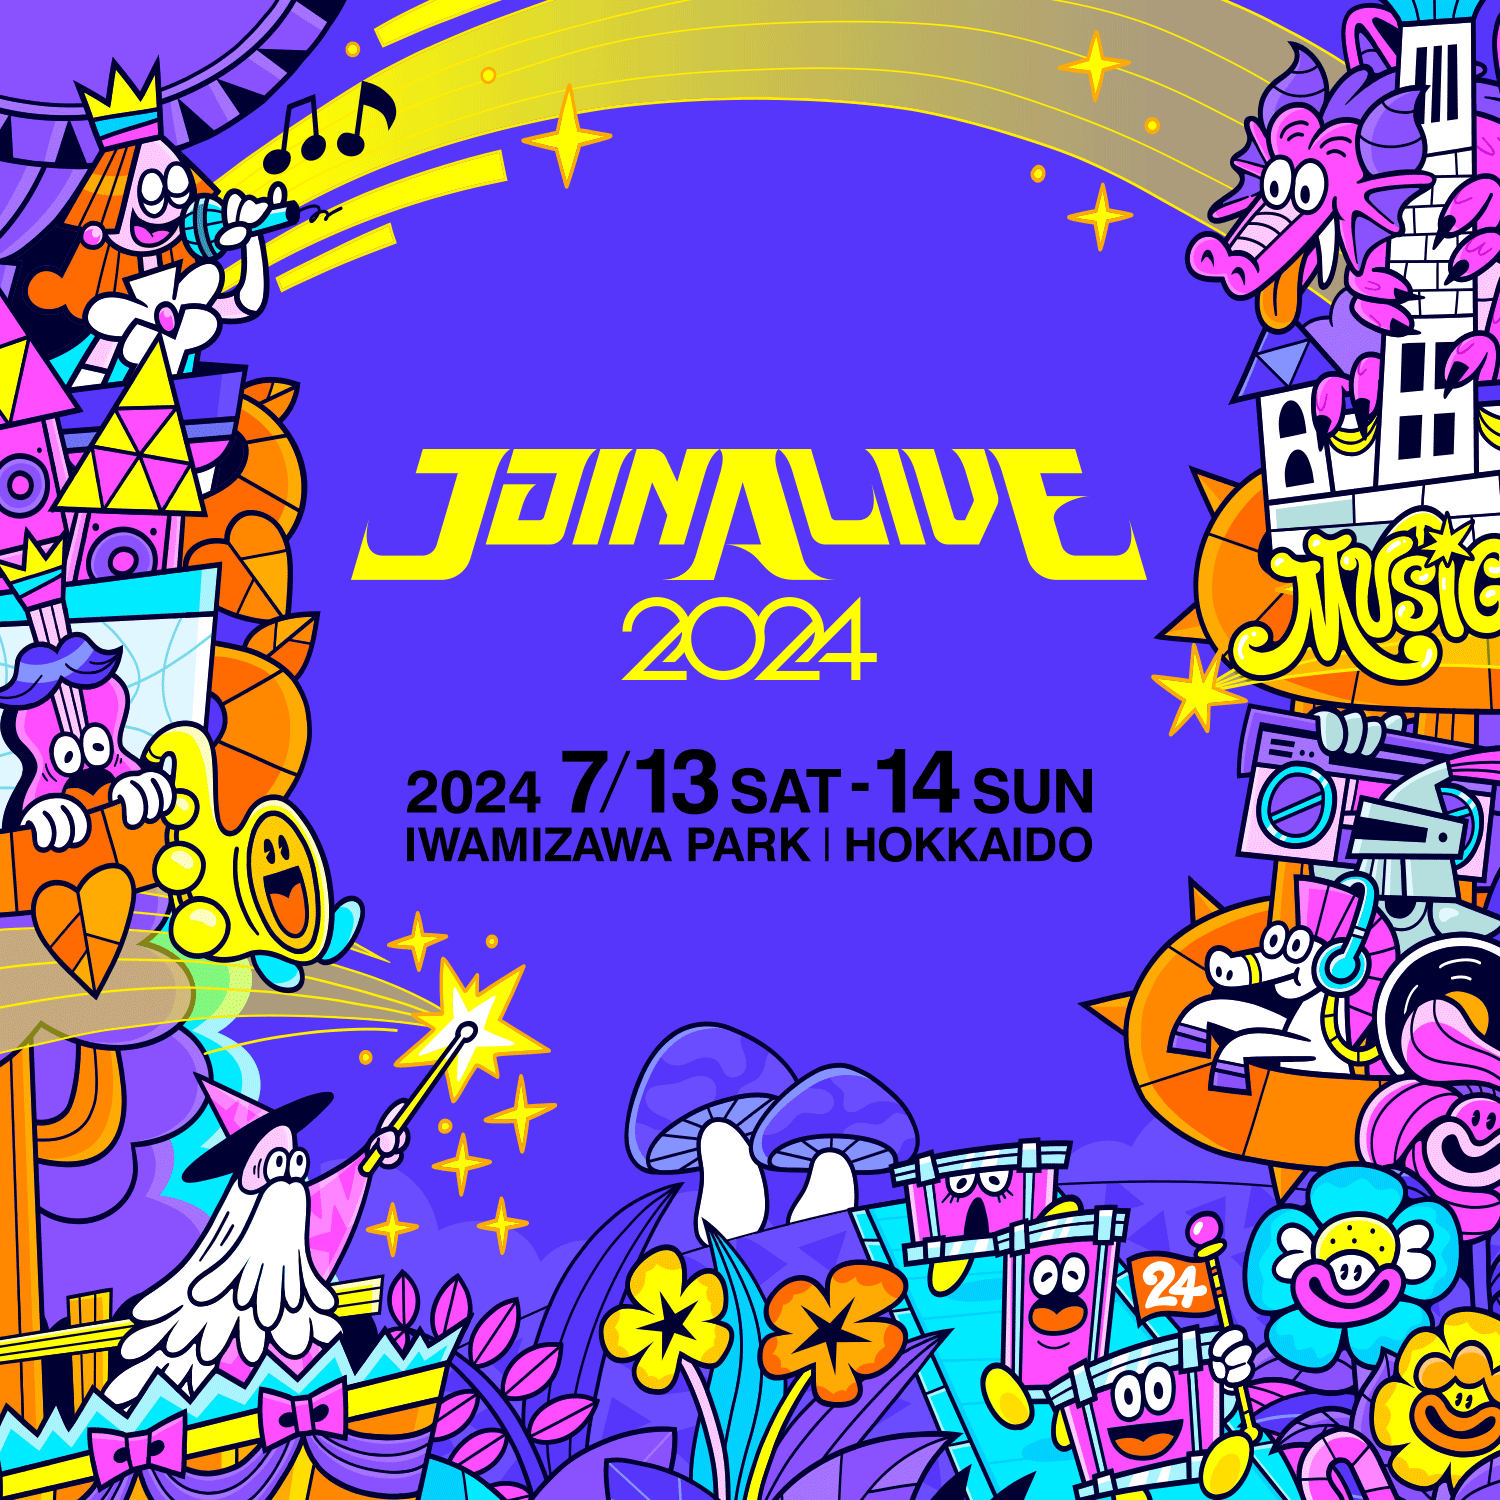 「JOIN ALIVE 2024」への出演が決定！